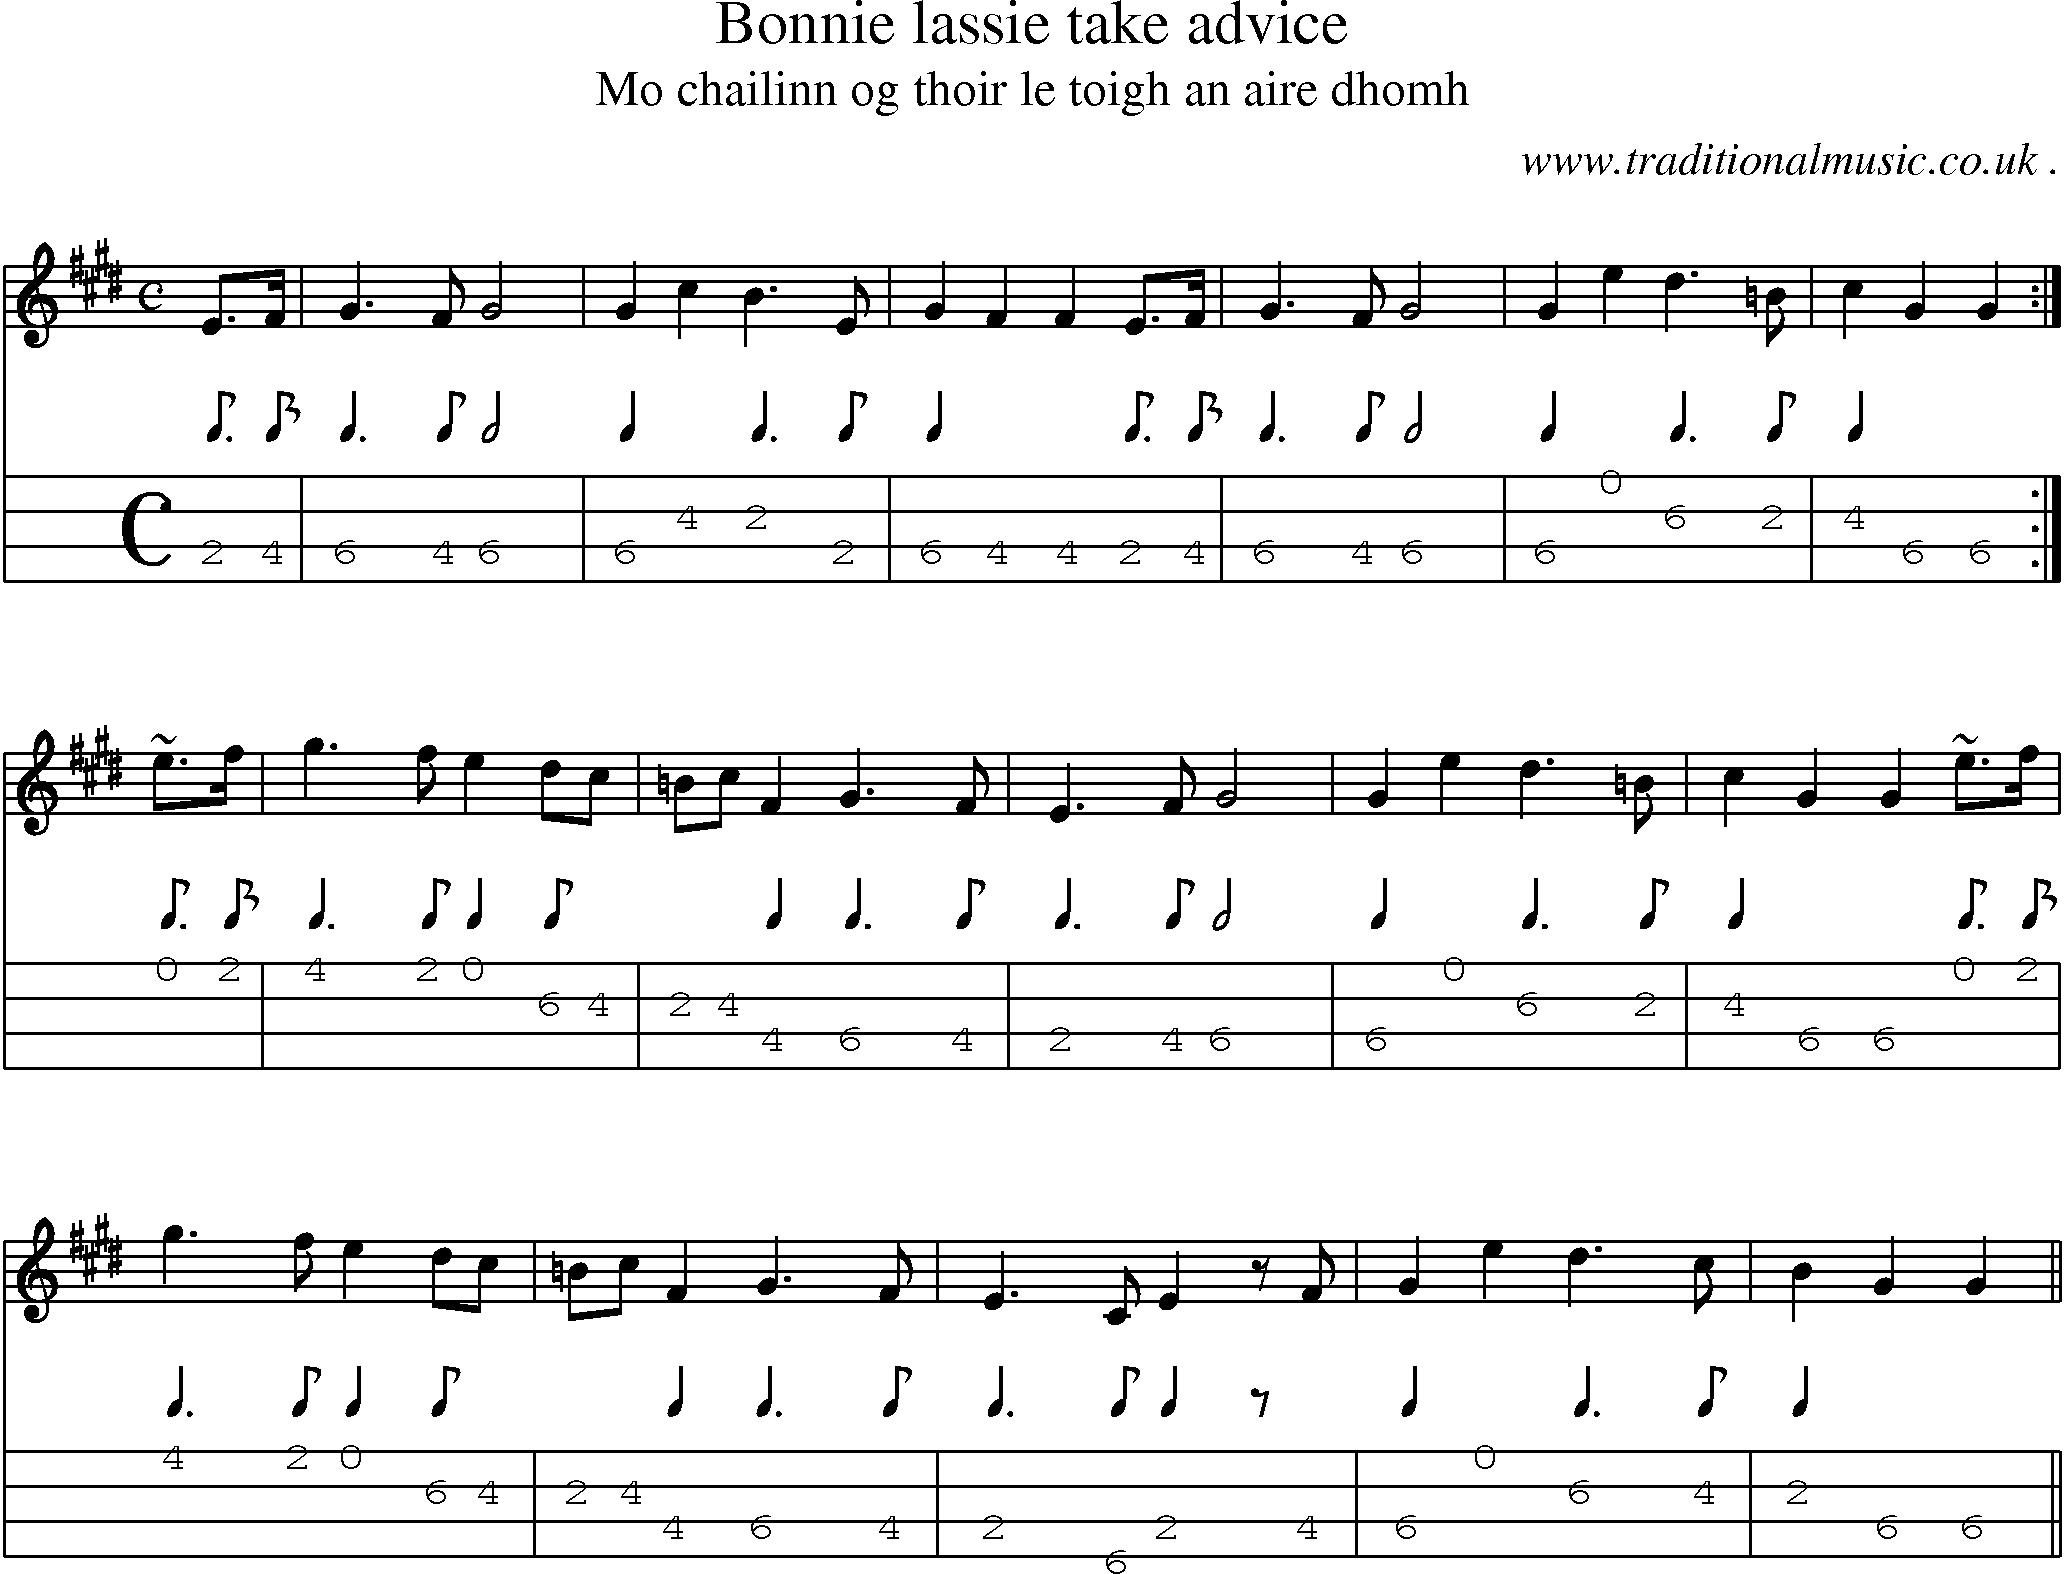 Sheet-music  score, Chords and Mandolin Tabs for Bonnie Lassie Take Advice